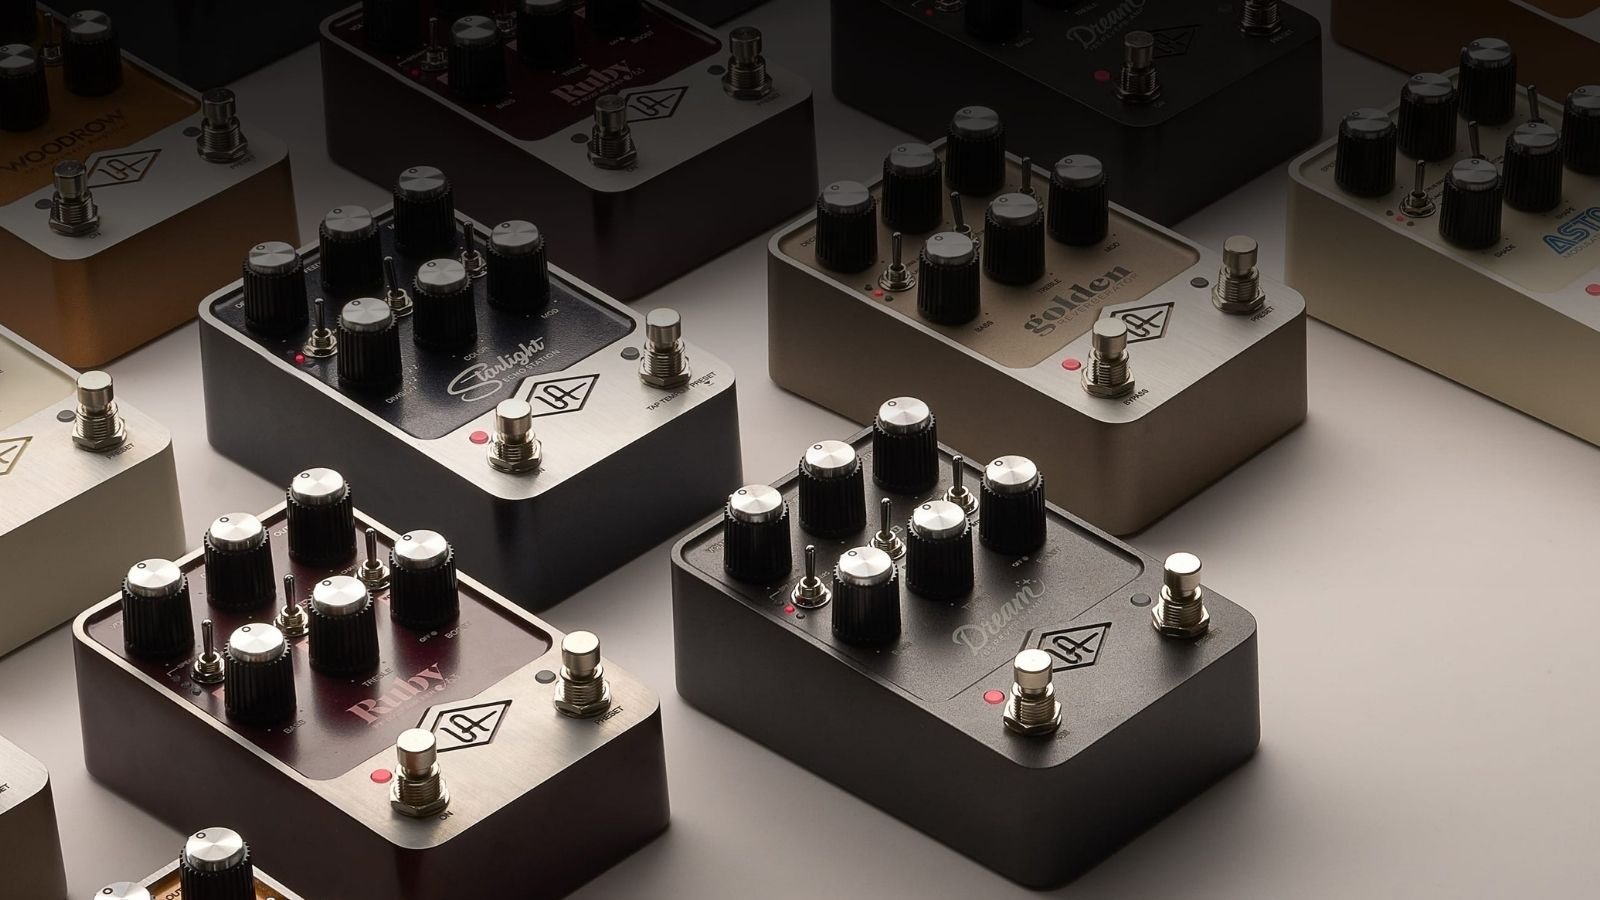 Universal Audio UAFX Guitar Pedals feature dual-processor engines & vintage-inspired sounds